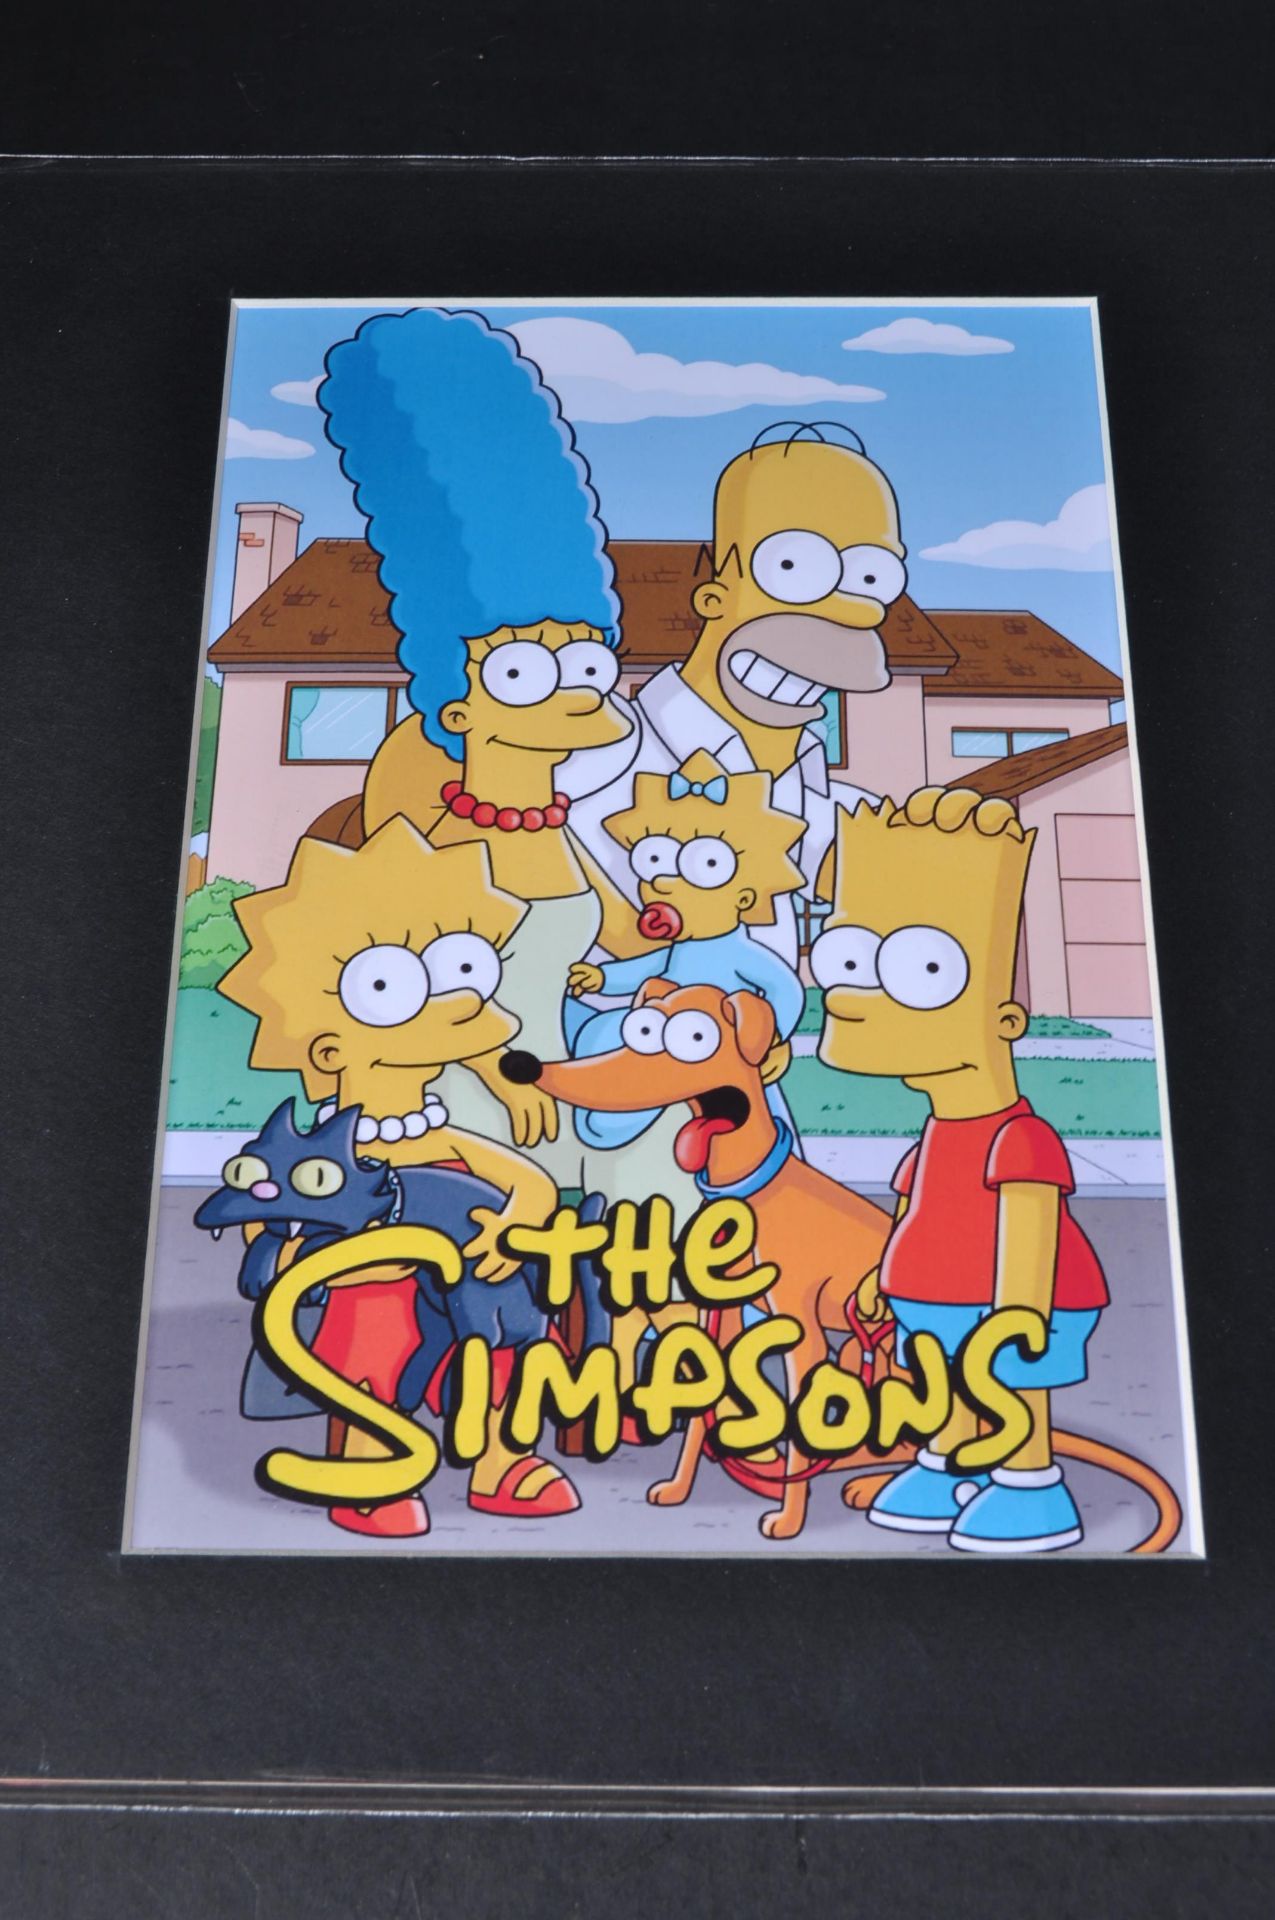 THE SIMPSONS - NANCY CARTWRIGHT - AUTOGRAPHED POSTCARD - Image 3 of 3